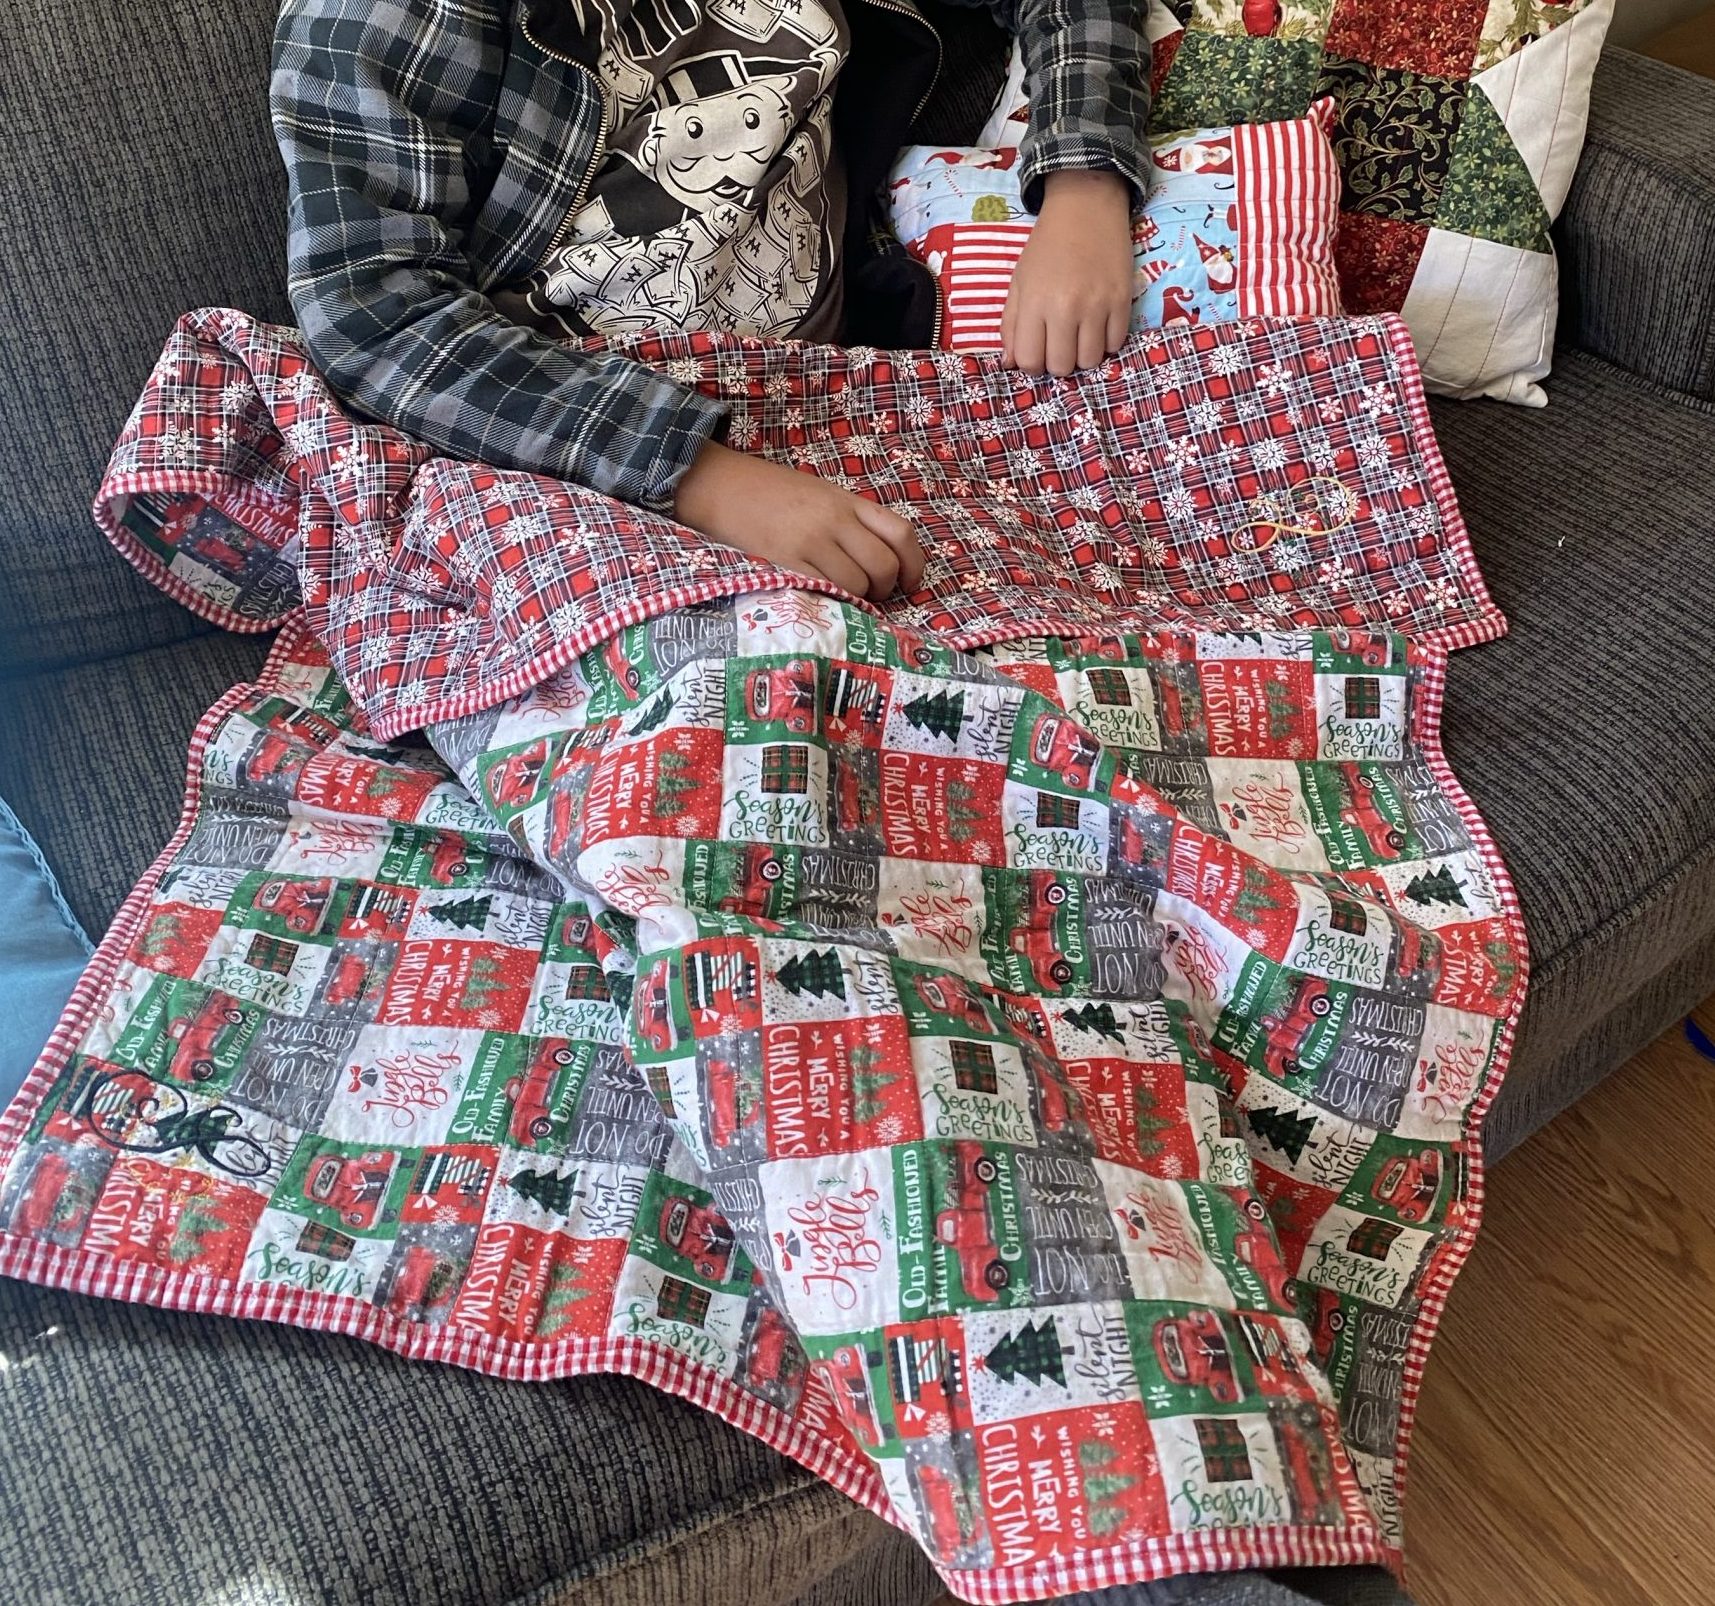 How to Make a Whole Cloth Quilt for Christmas or Baby- Paper Pattern + PDF